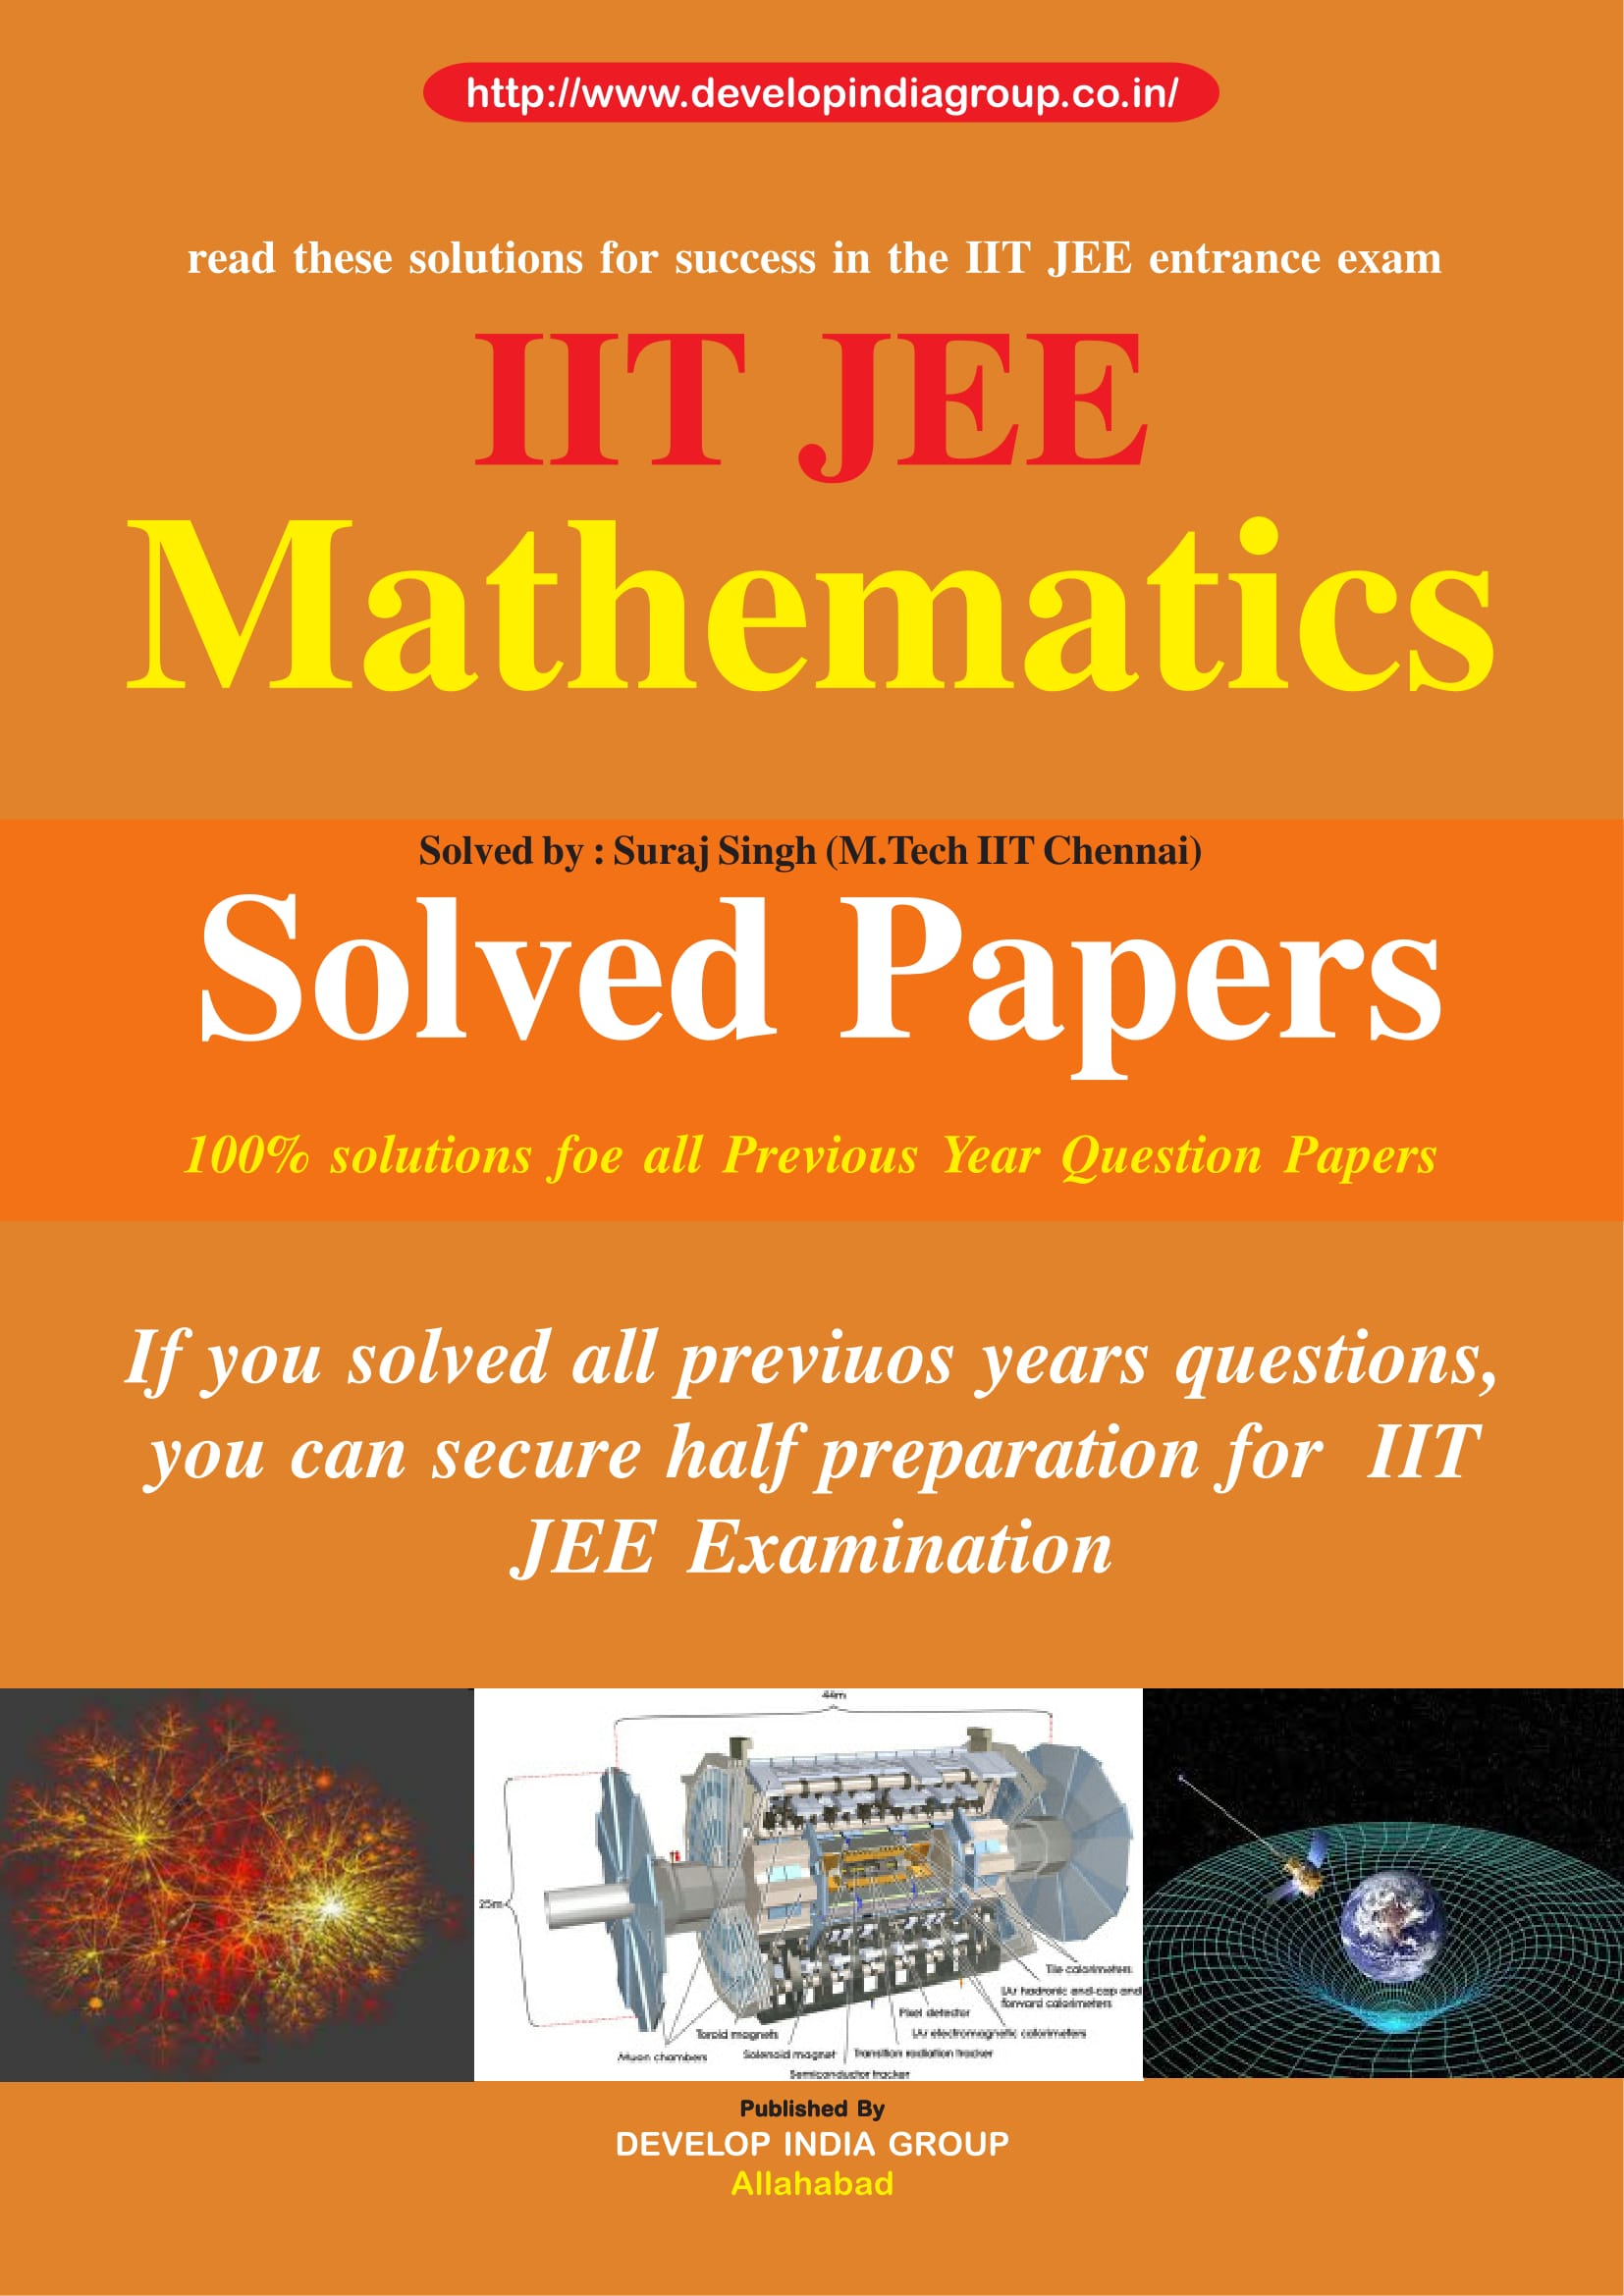 IIT_JEE_solved_paper_for_Mathematics